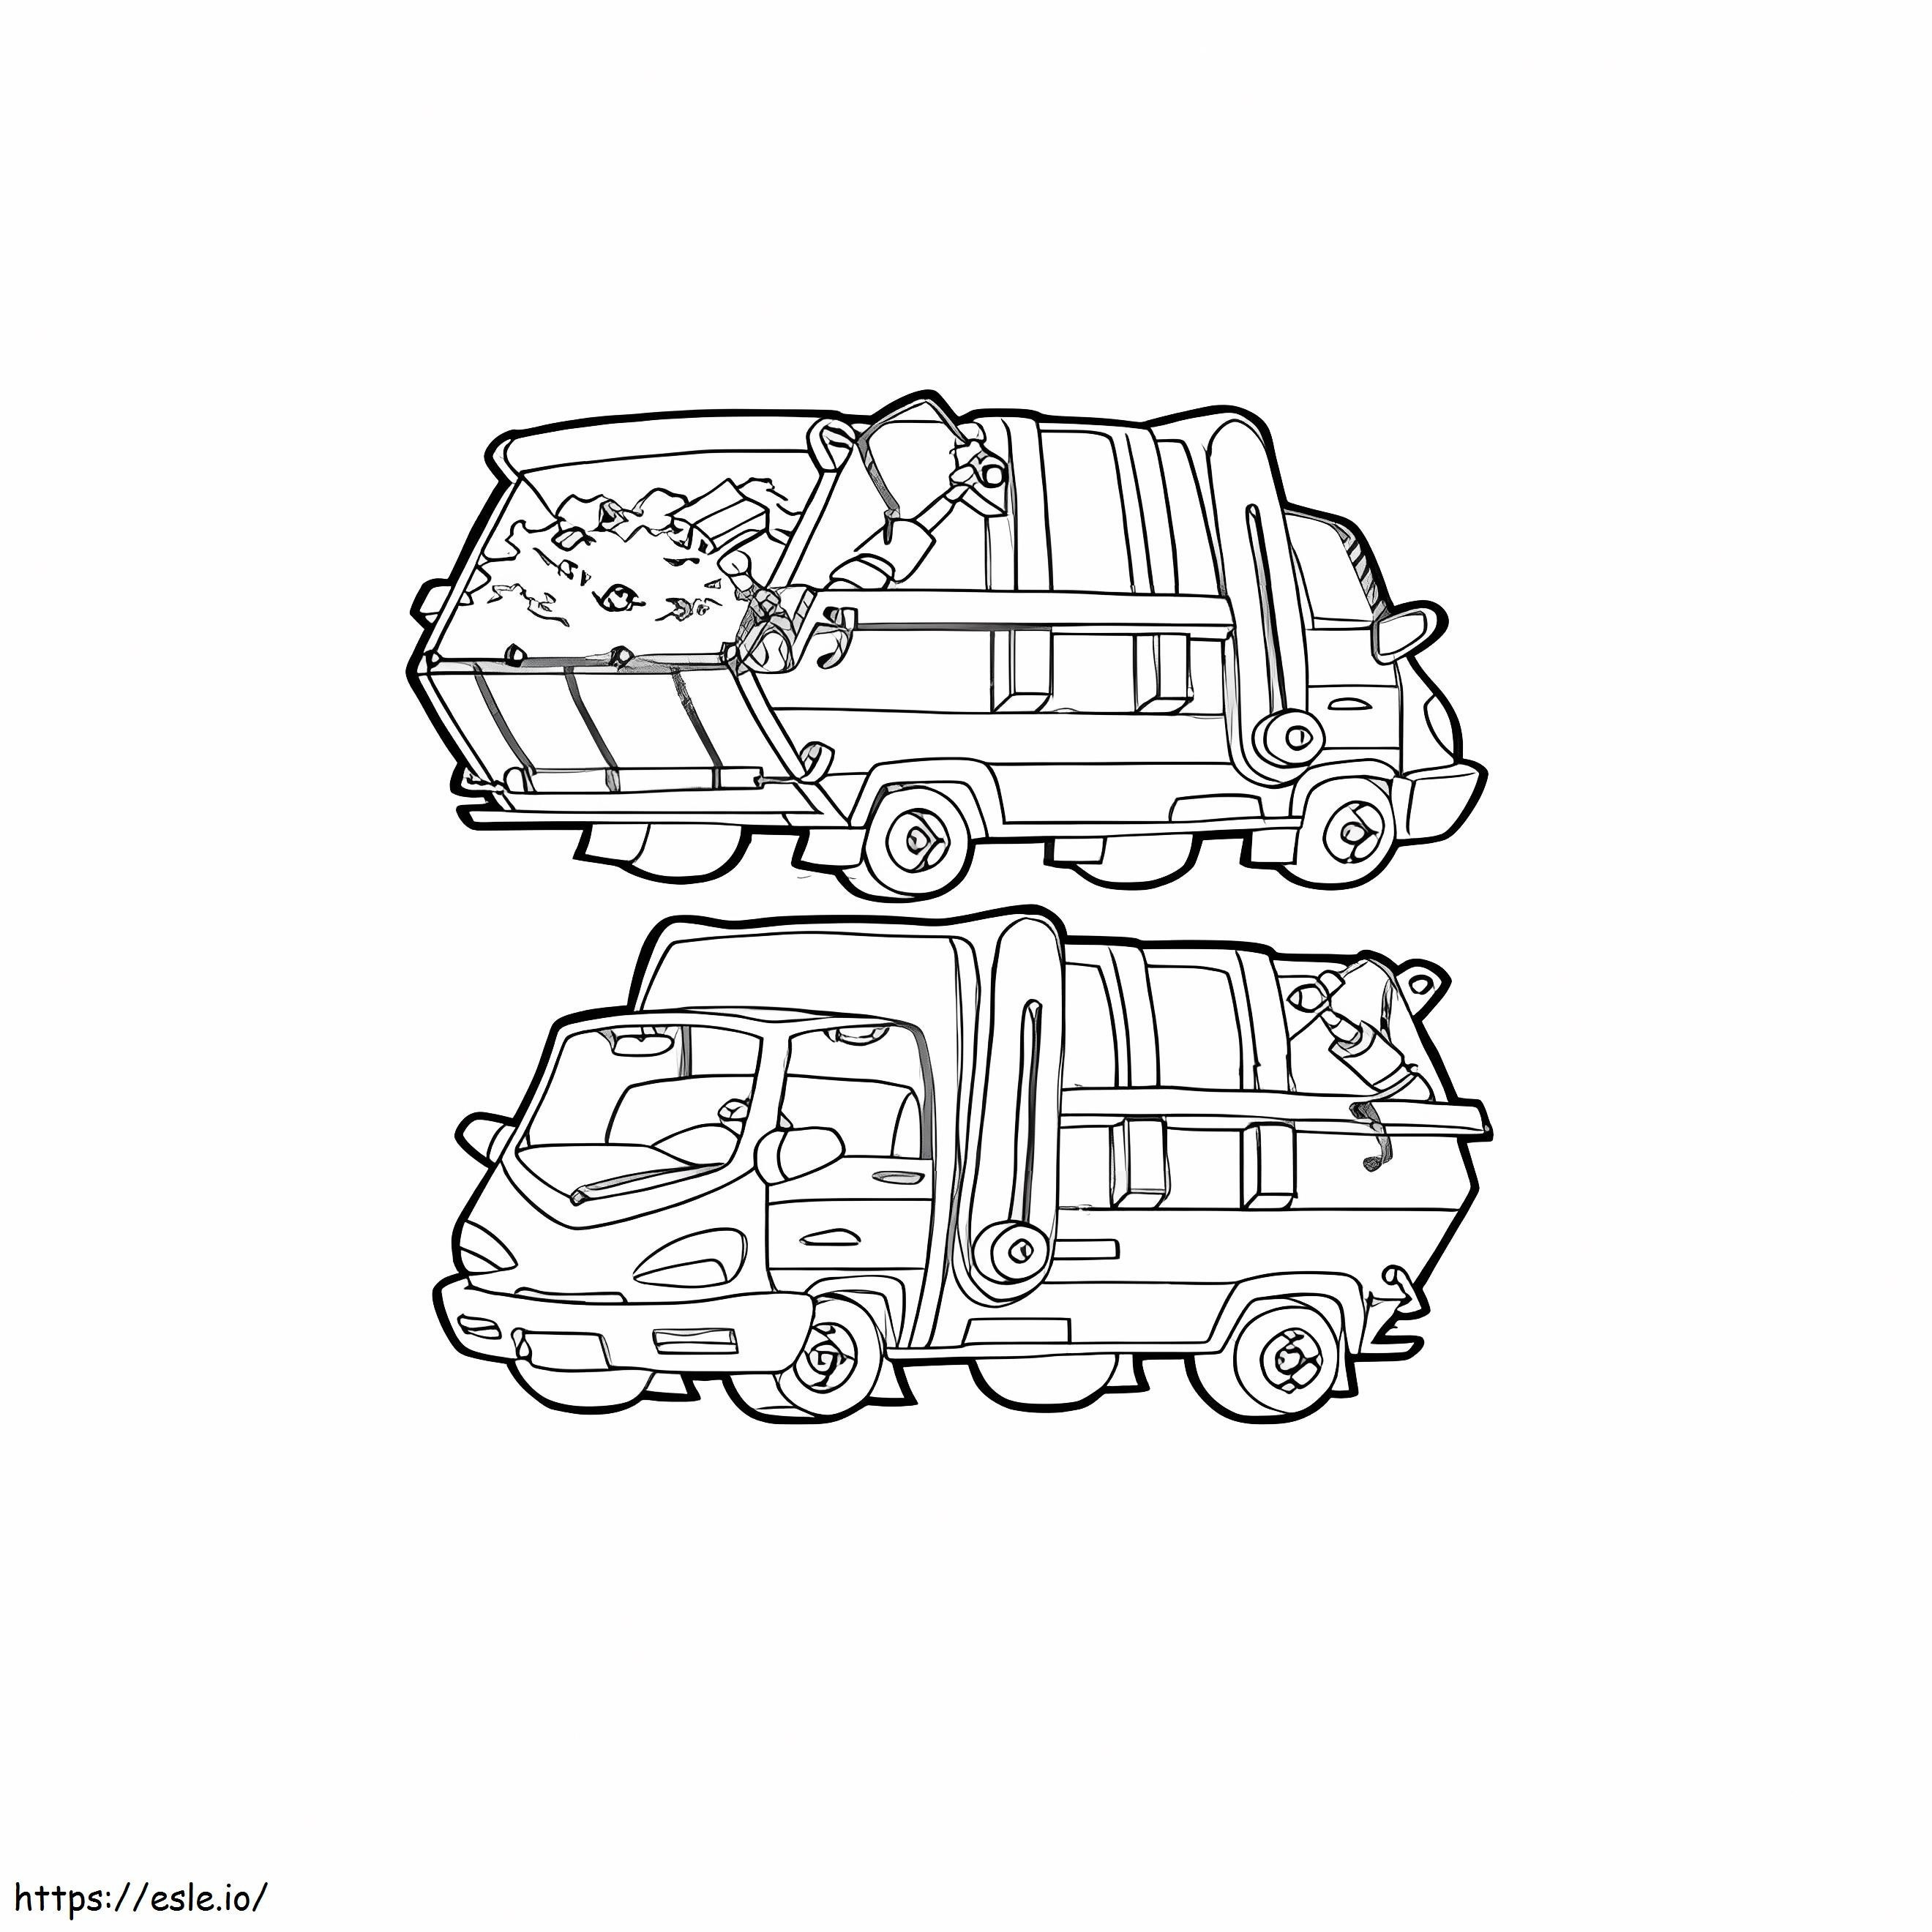 Printable Two Little Garbage Trucks coloring page